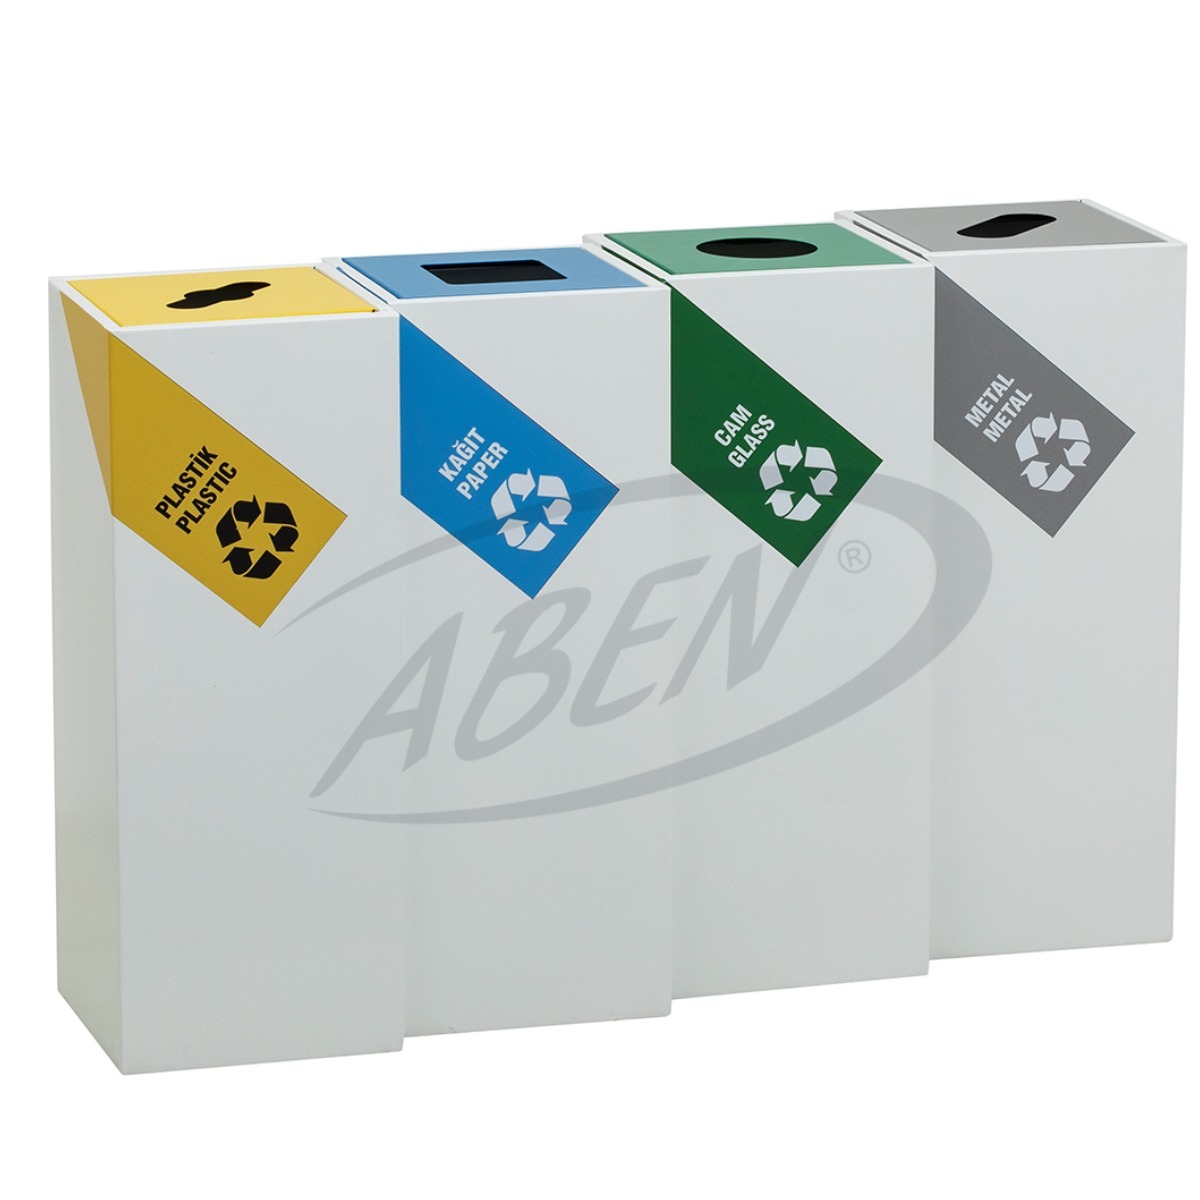 AB-726 4’Part Recycle Bin product logo